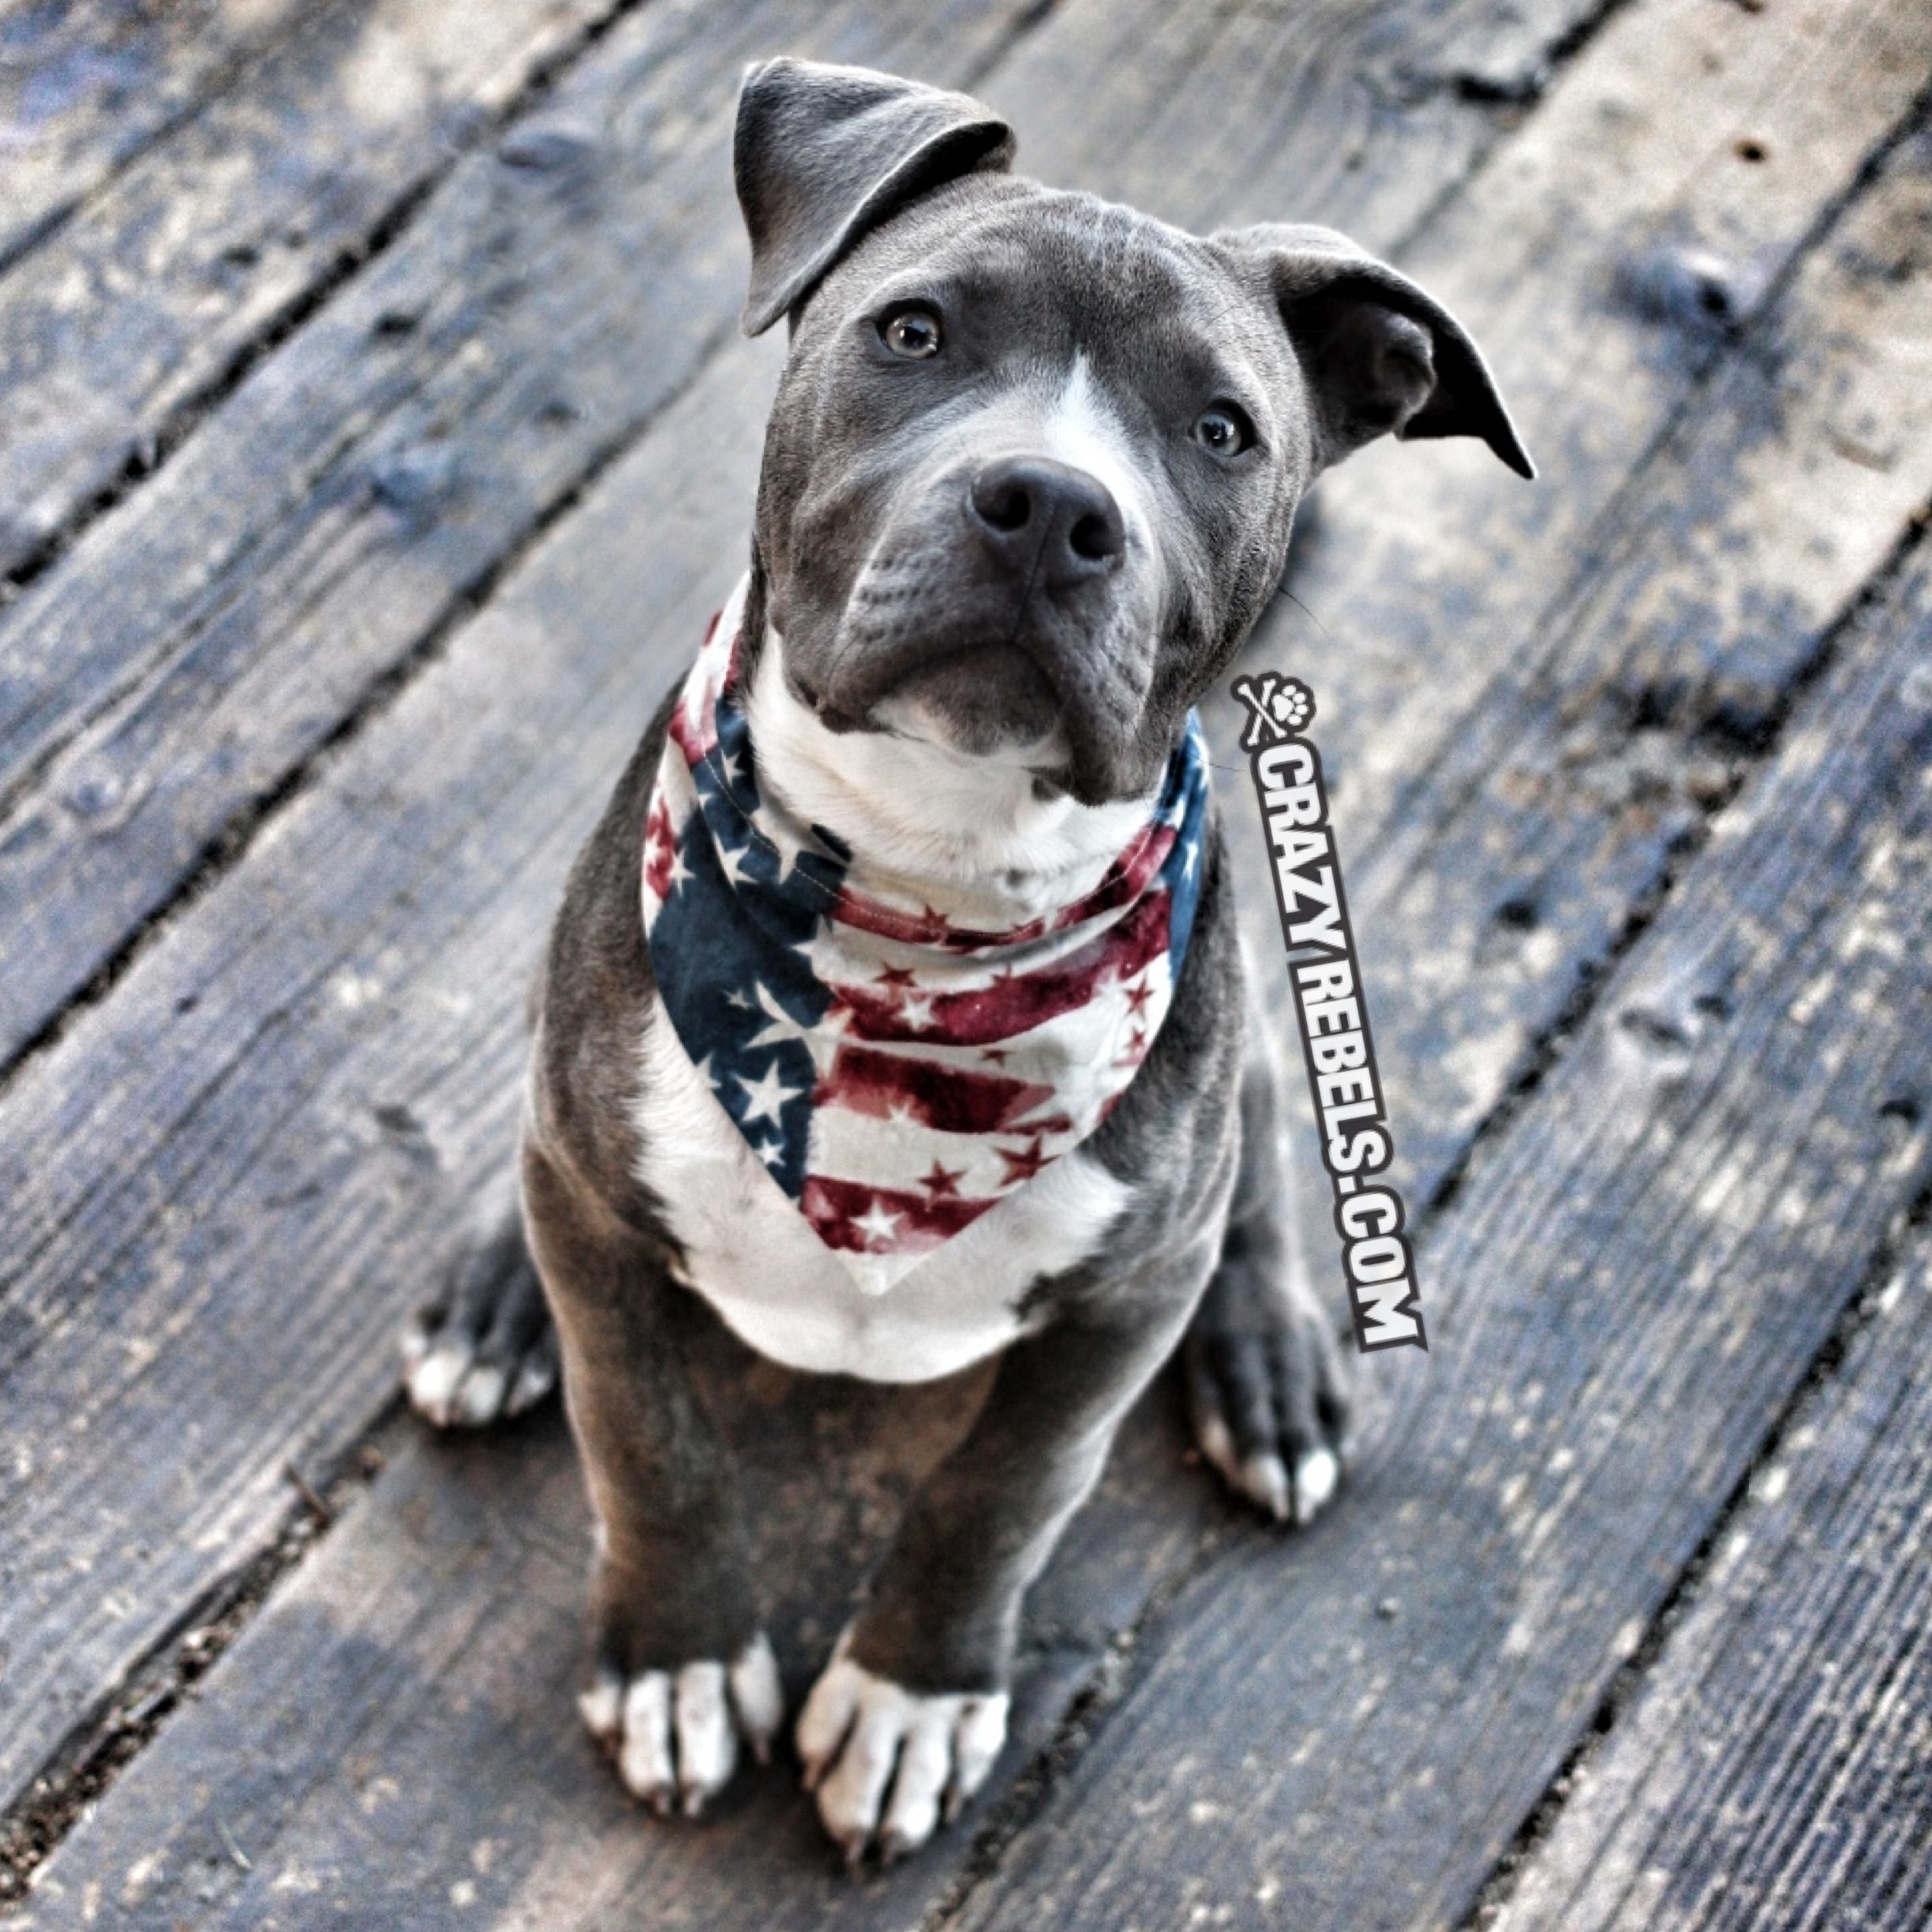 Apollo is all ready for the 4th of July in his Freedom print